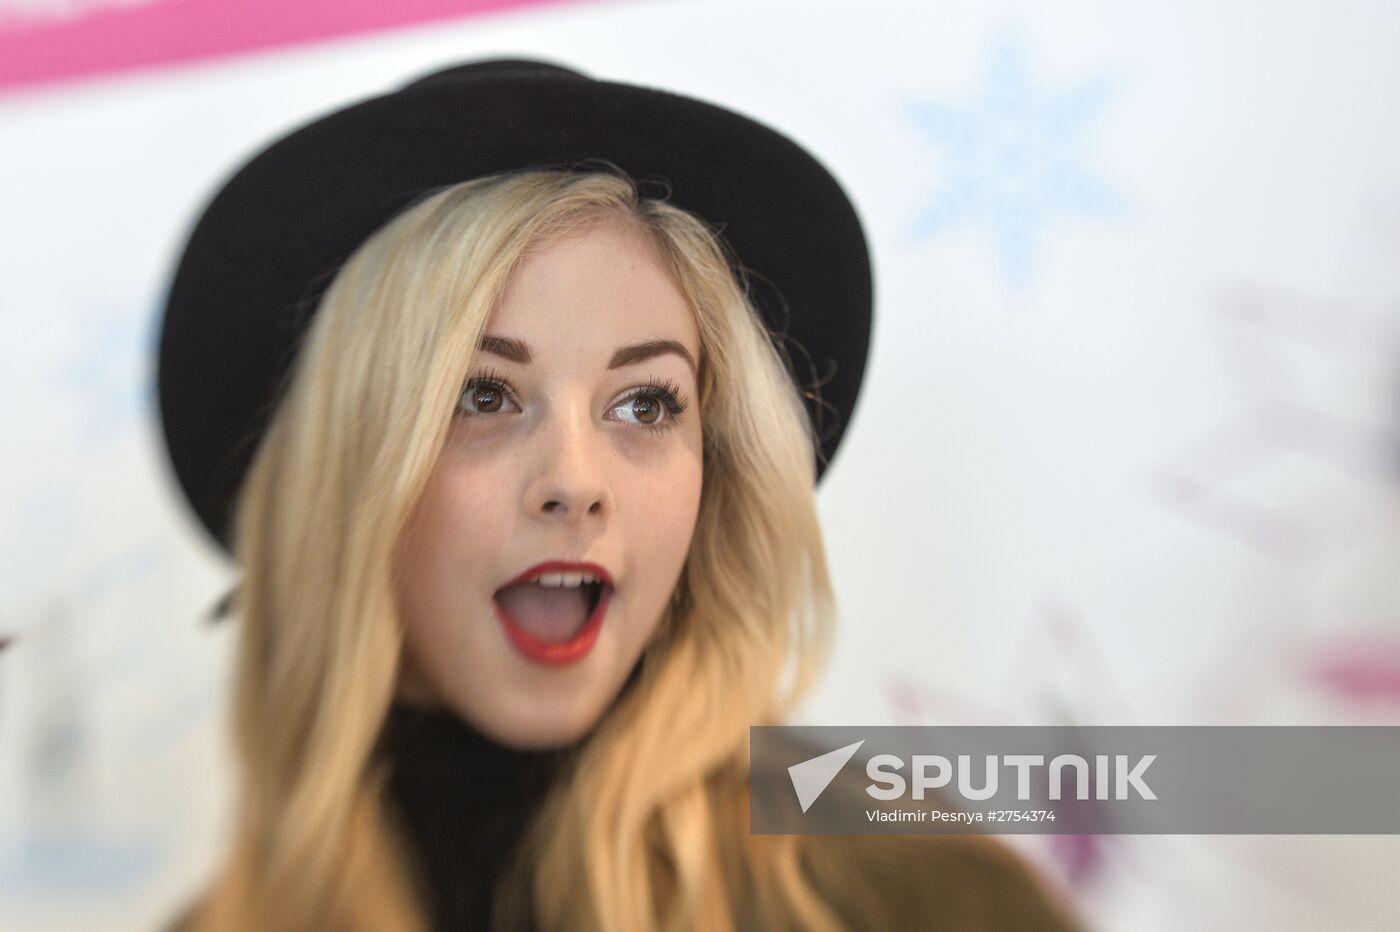 Photo call by US figure skater Gracie Gold